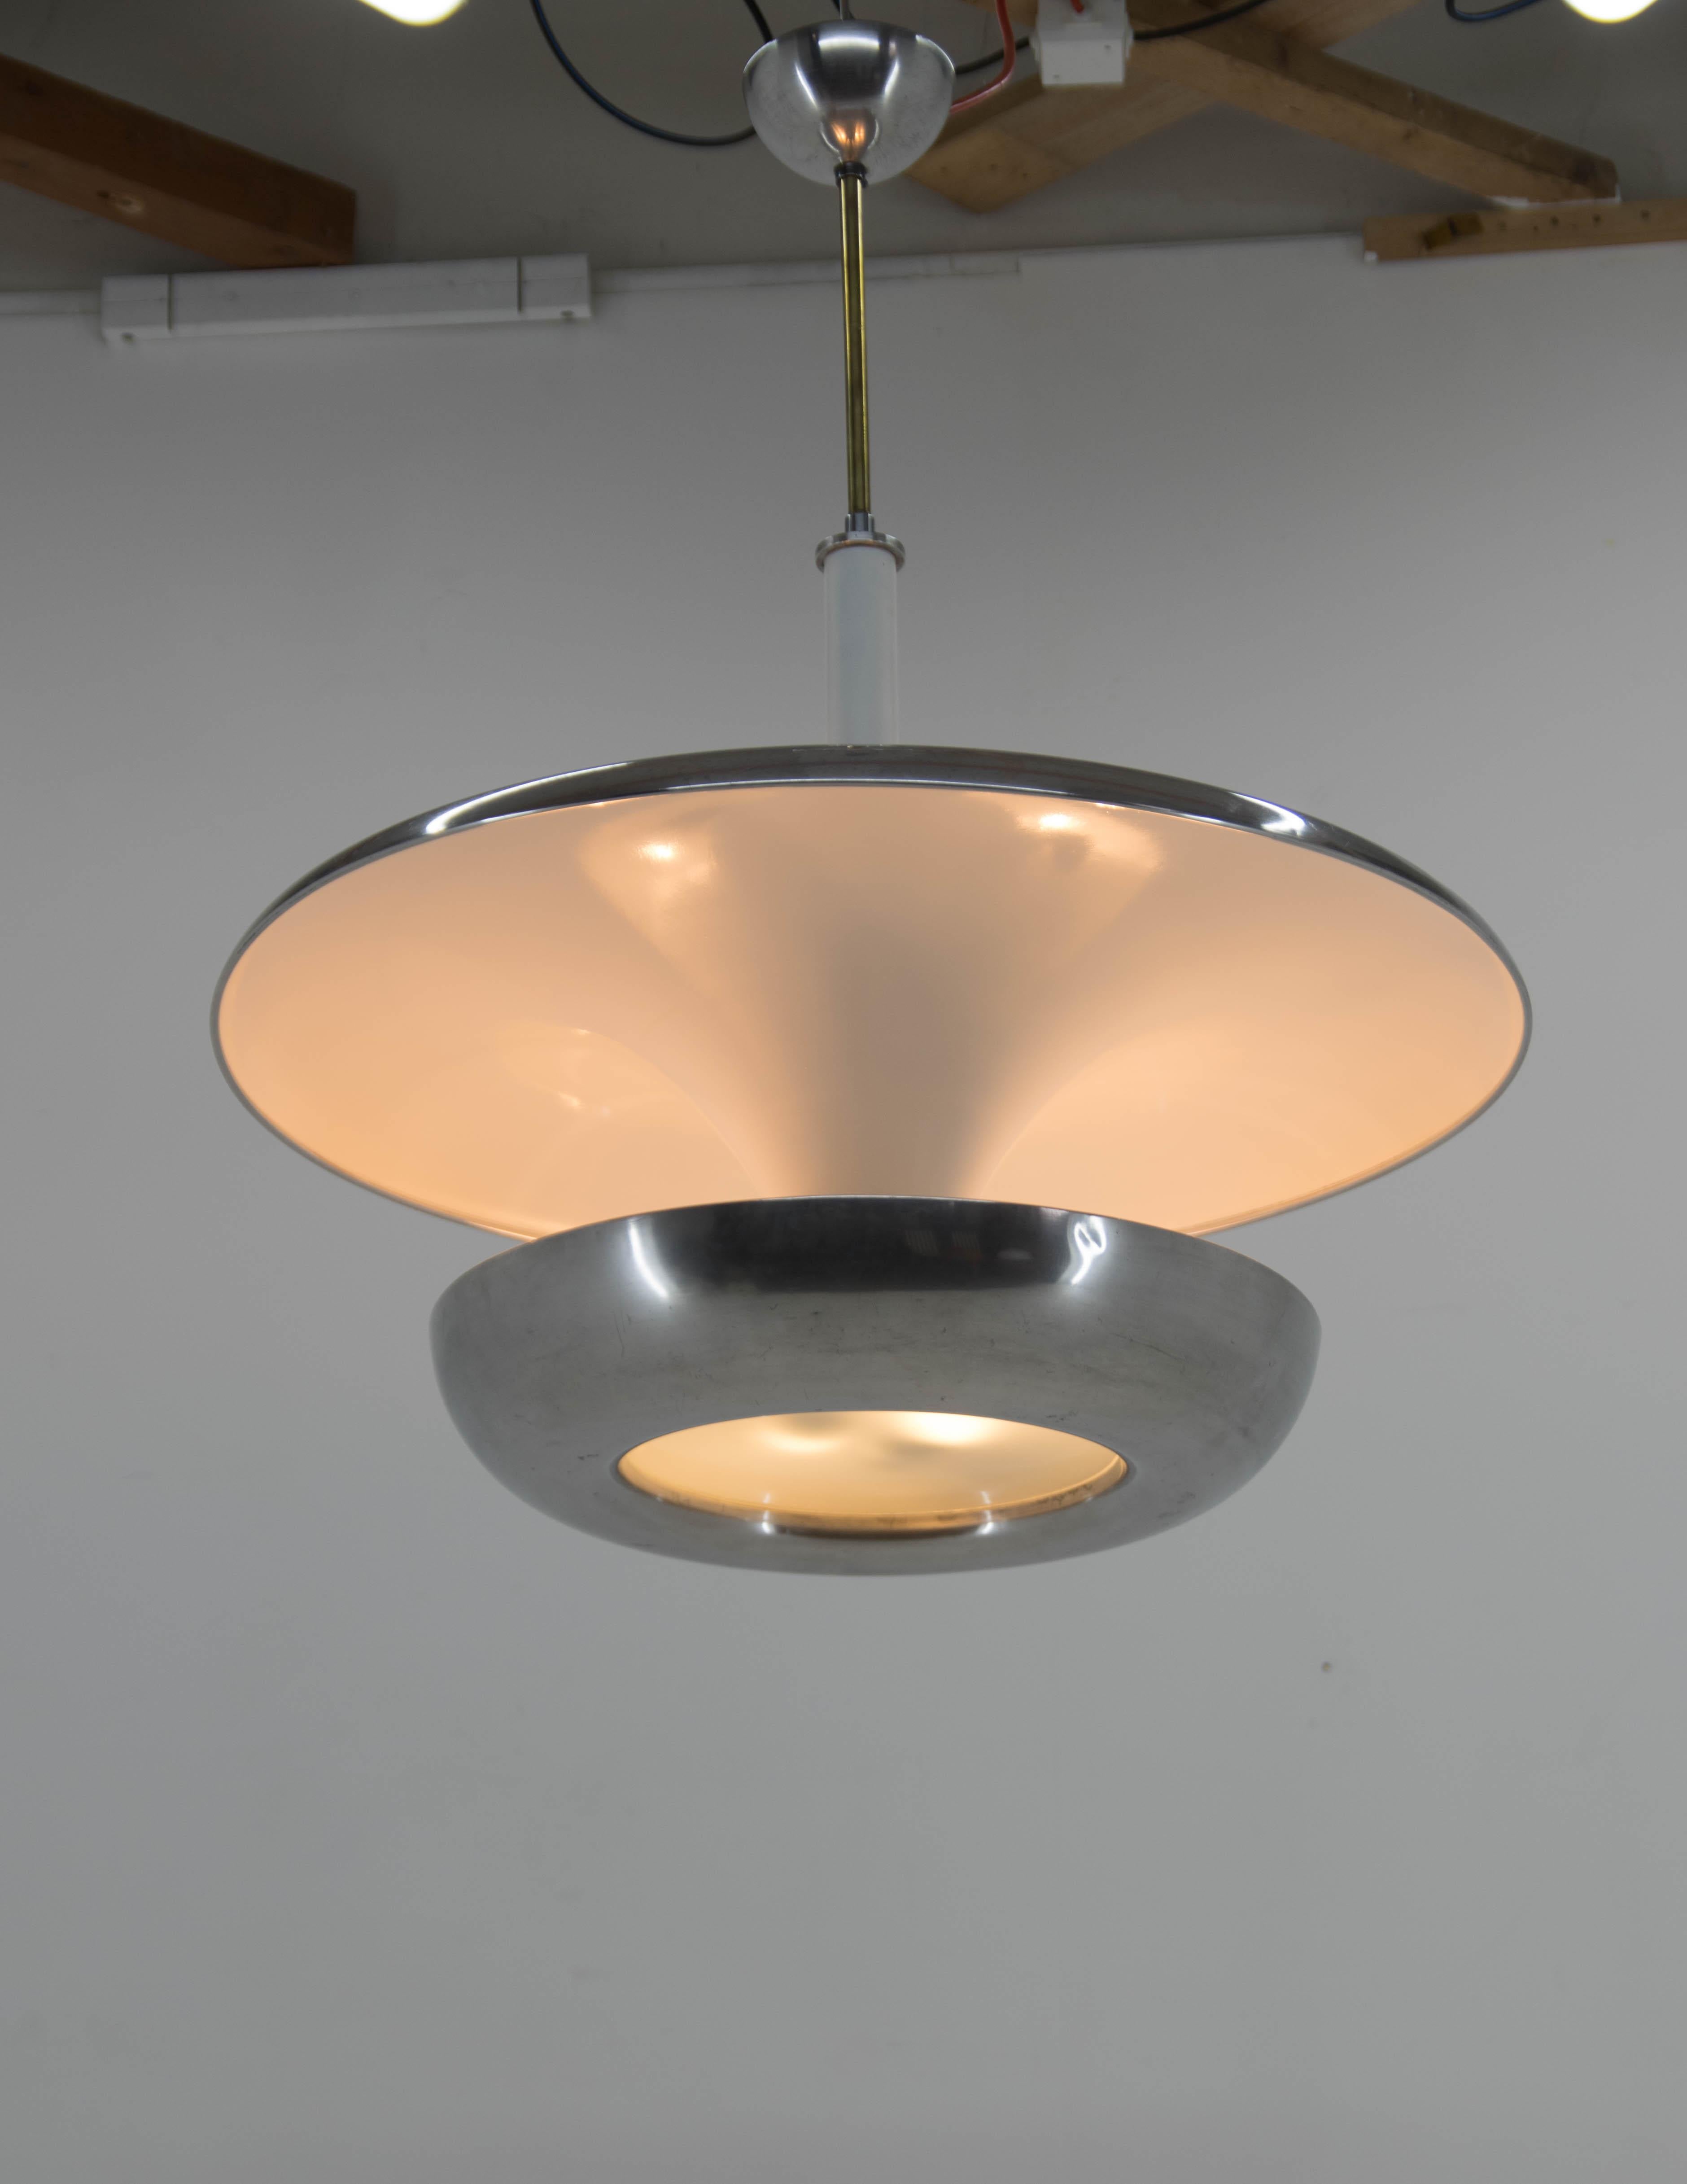 Ultra rare XXL Bauhaus chandelier made by IAS company. The biggest version of its kind from 1920s. Very eye-catching piece!
Item was carefully restored. The shade made of aluminum was polished. Original sand blasted glass on bottom. New white paint.